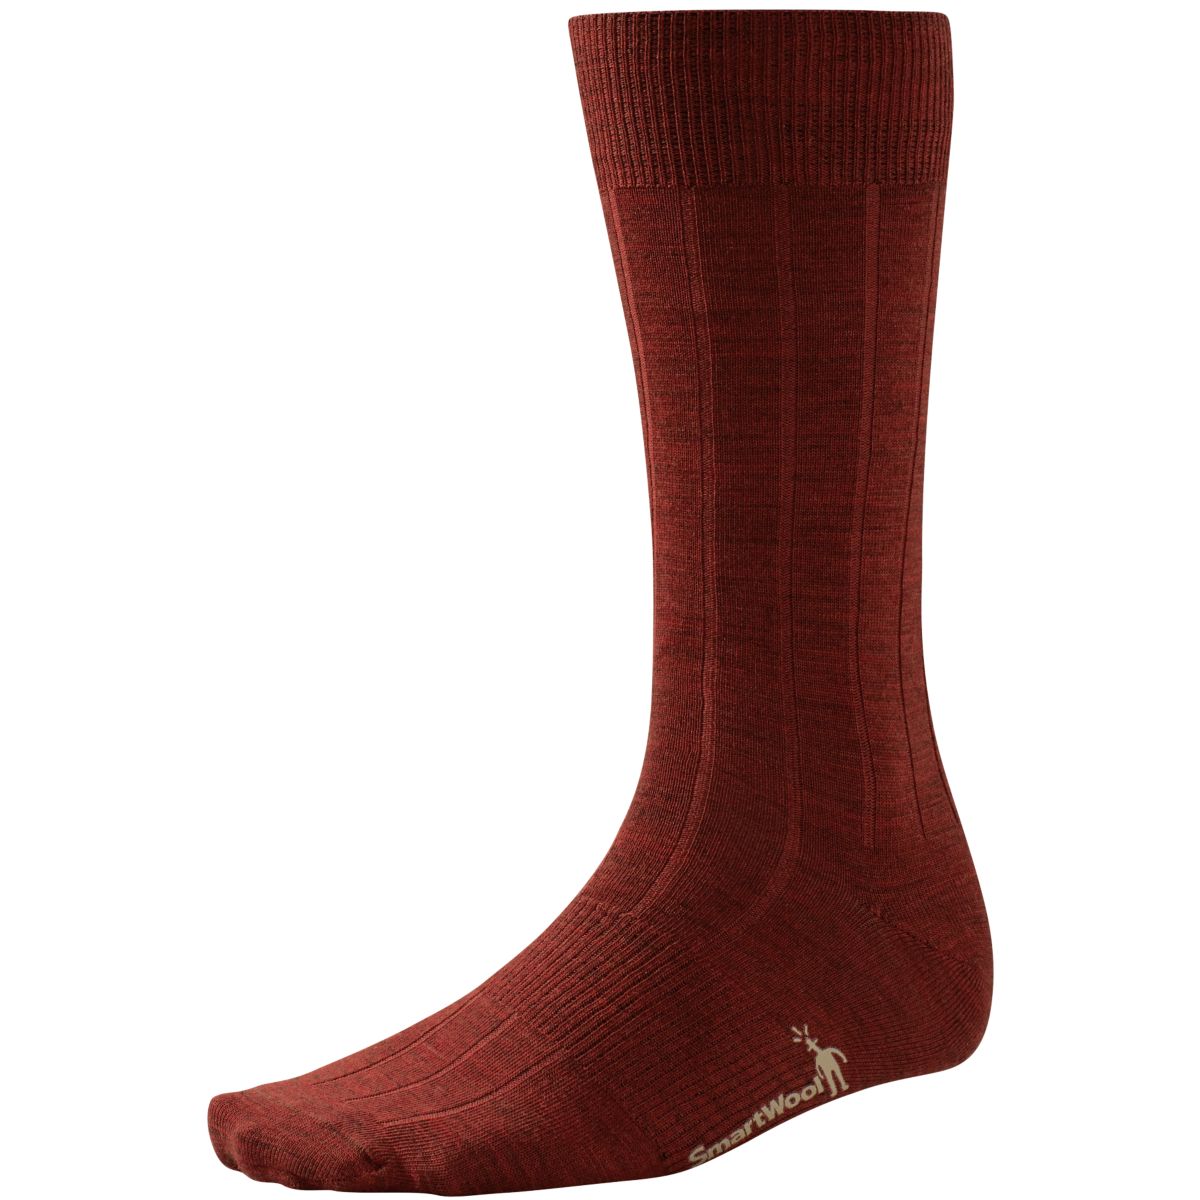 SmartWool Mens City Slicker Discontinued Pricing